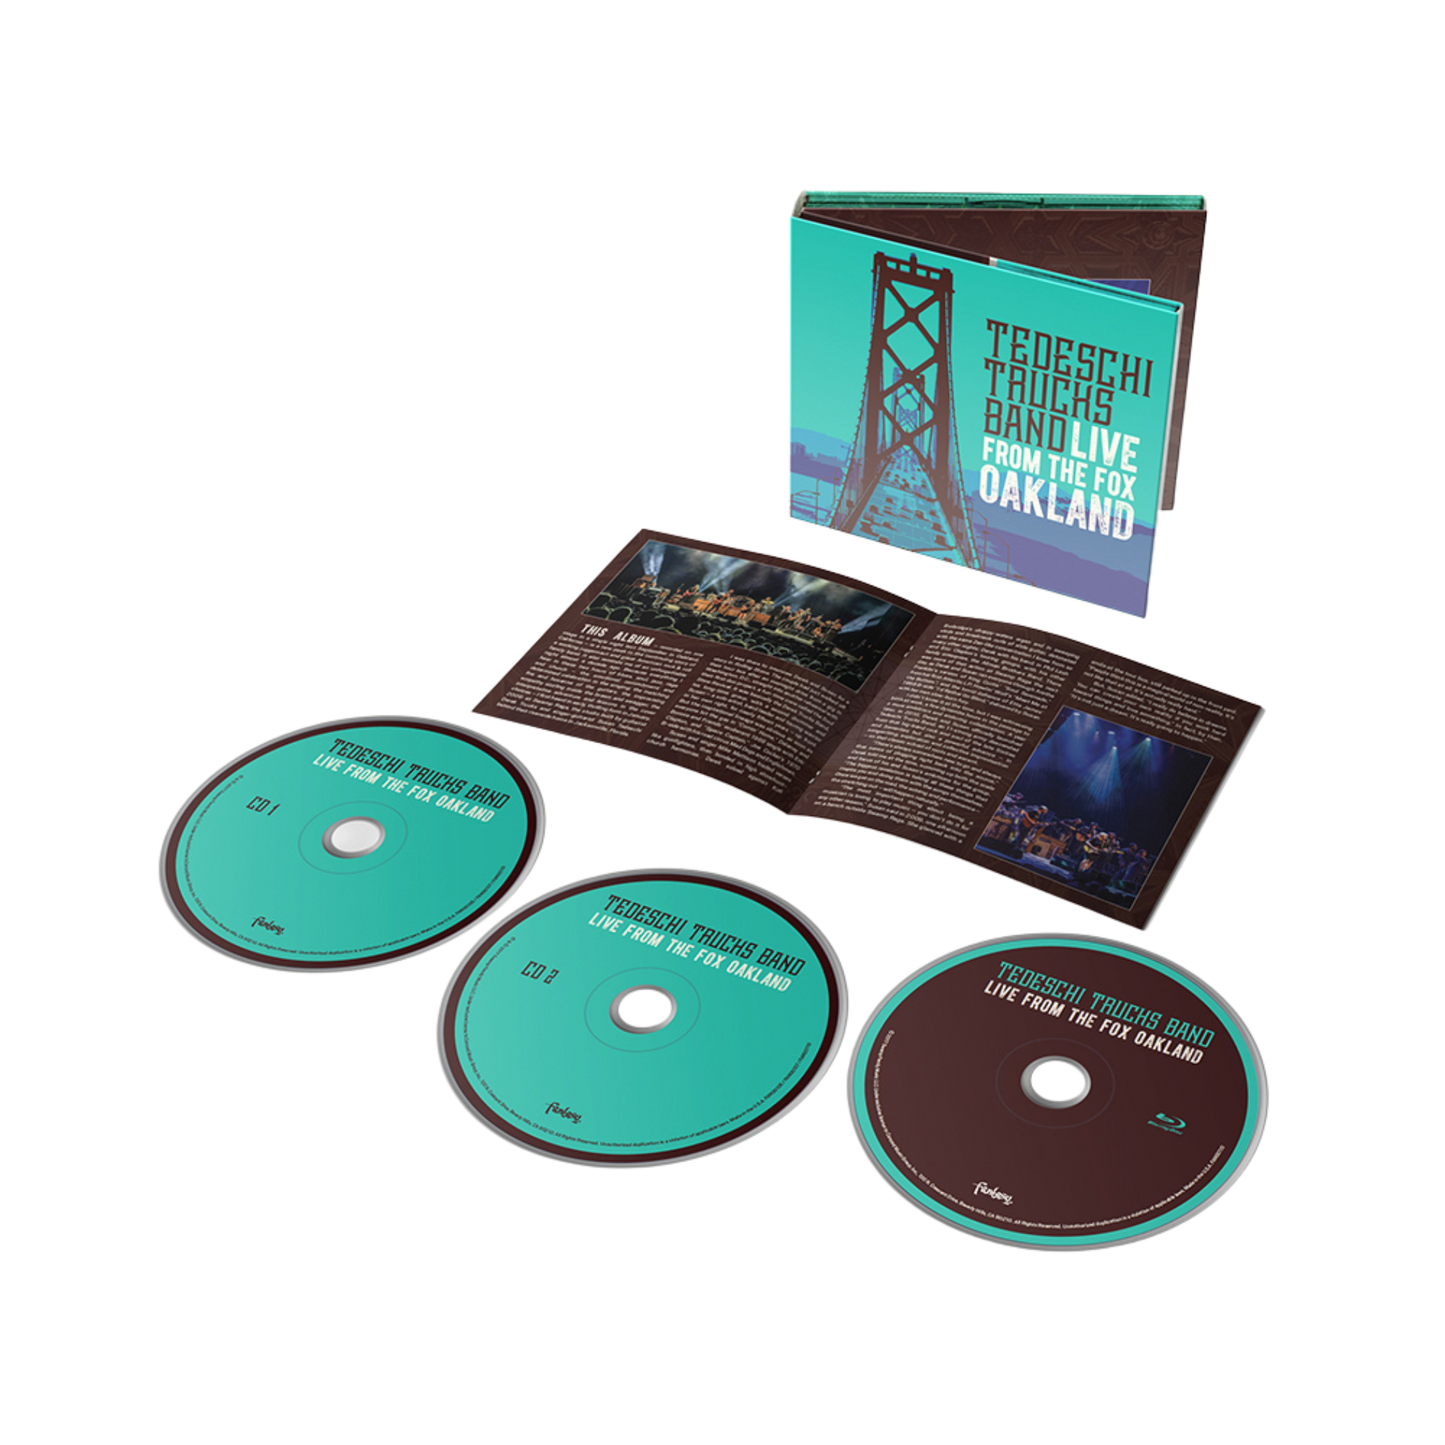 Live From The Fox Oakland - CD/DVD Set